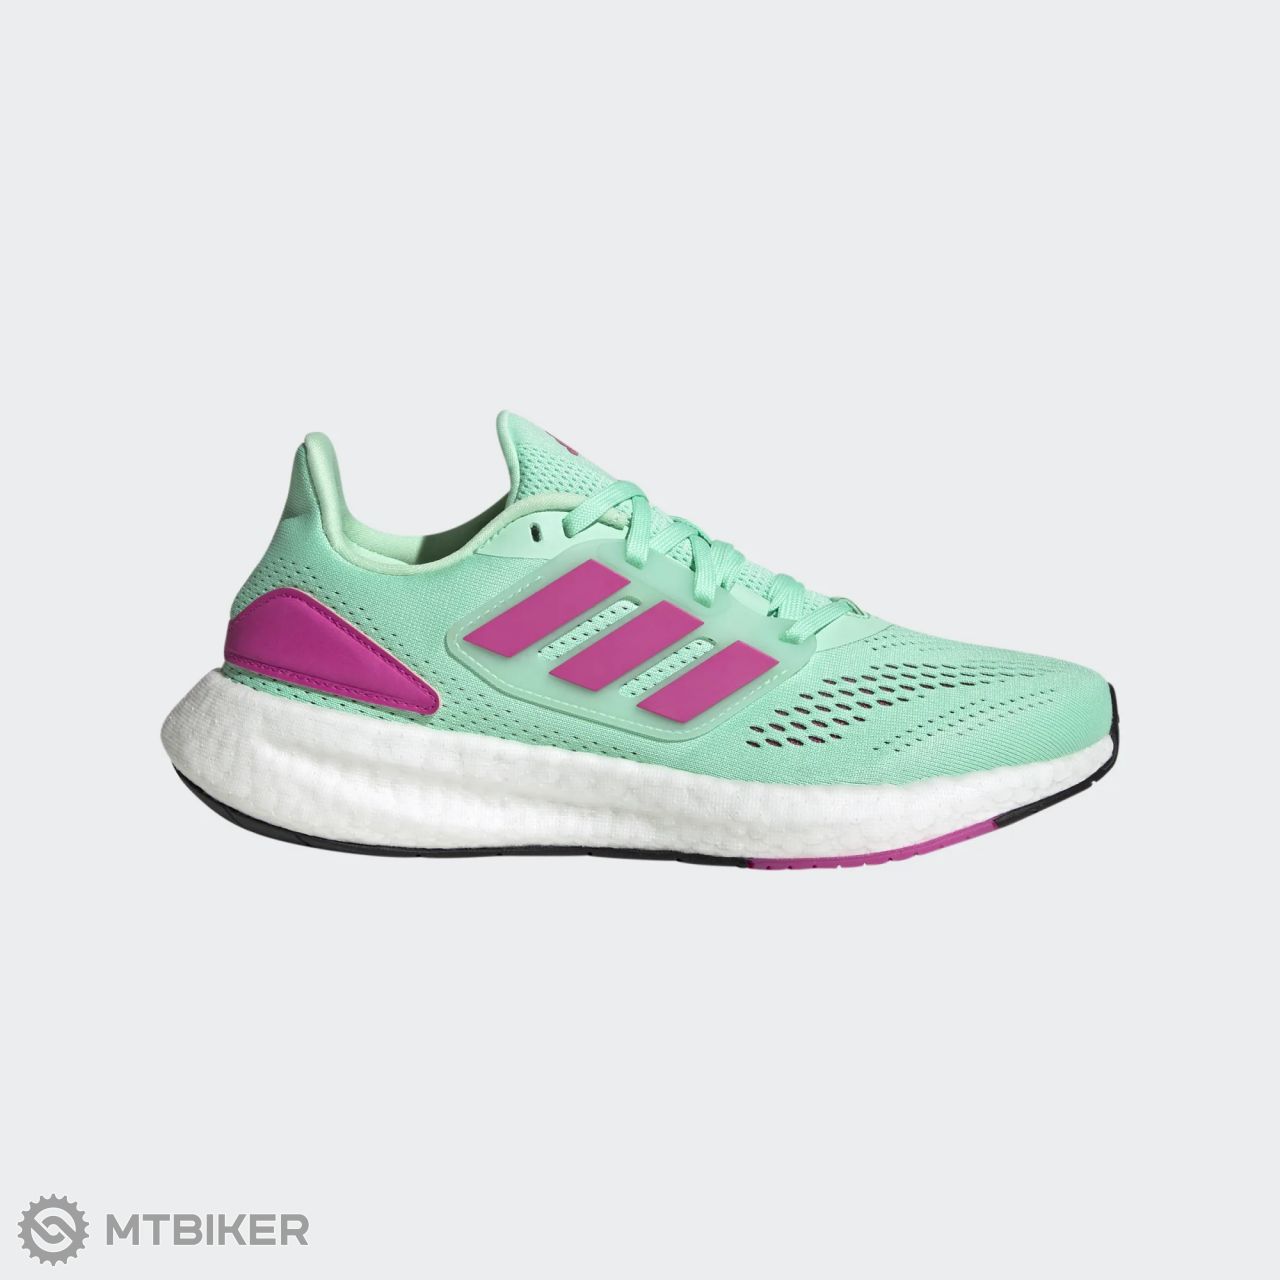 PureBoost 22 shoes, mint/pink/white -